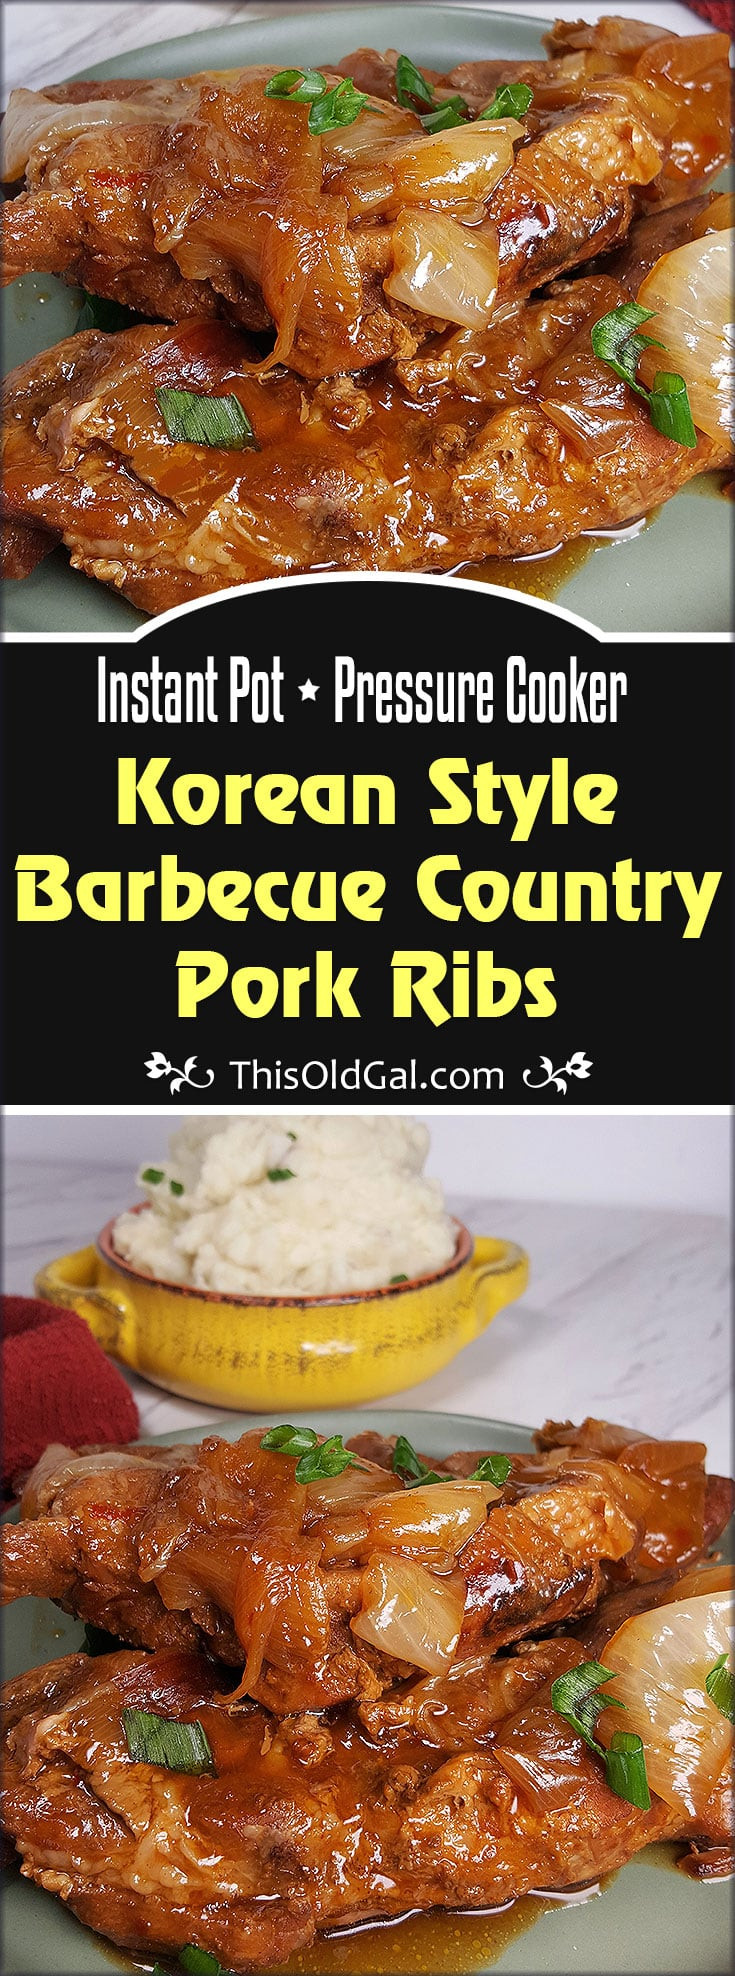 Country Style Pork Ribs Pressure Cooker
 Pressure Cooker Korean Style Barbecue Country Pork Ribs